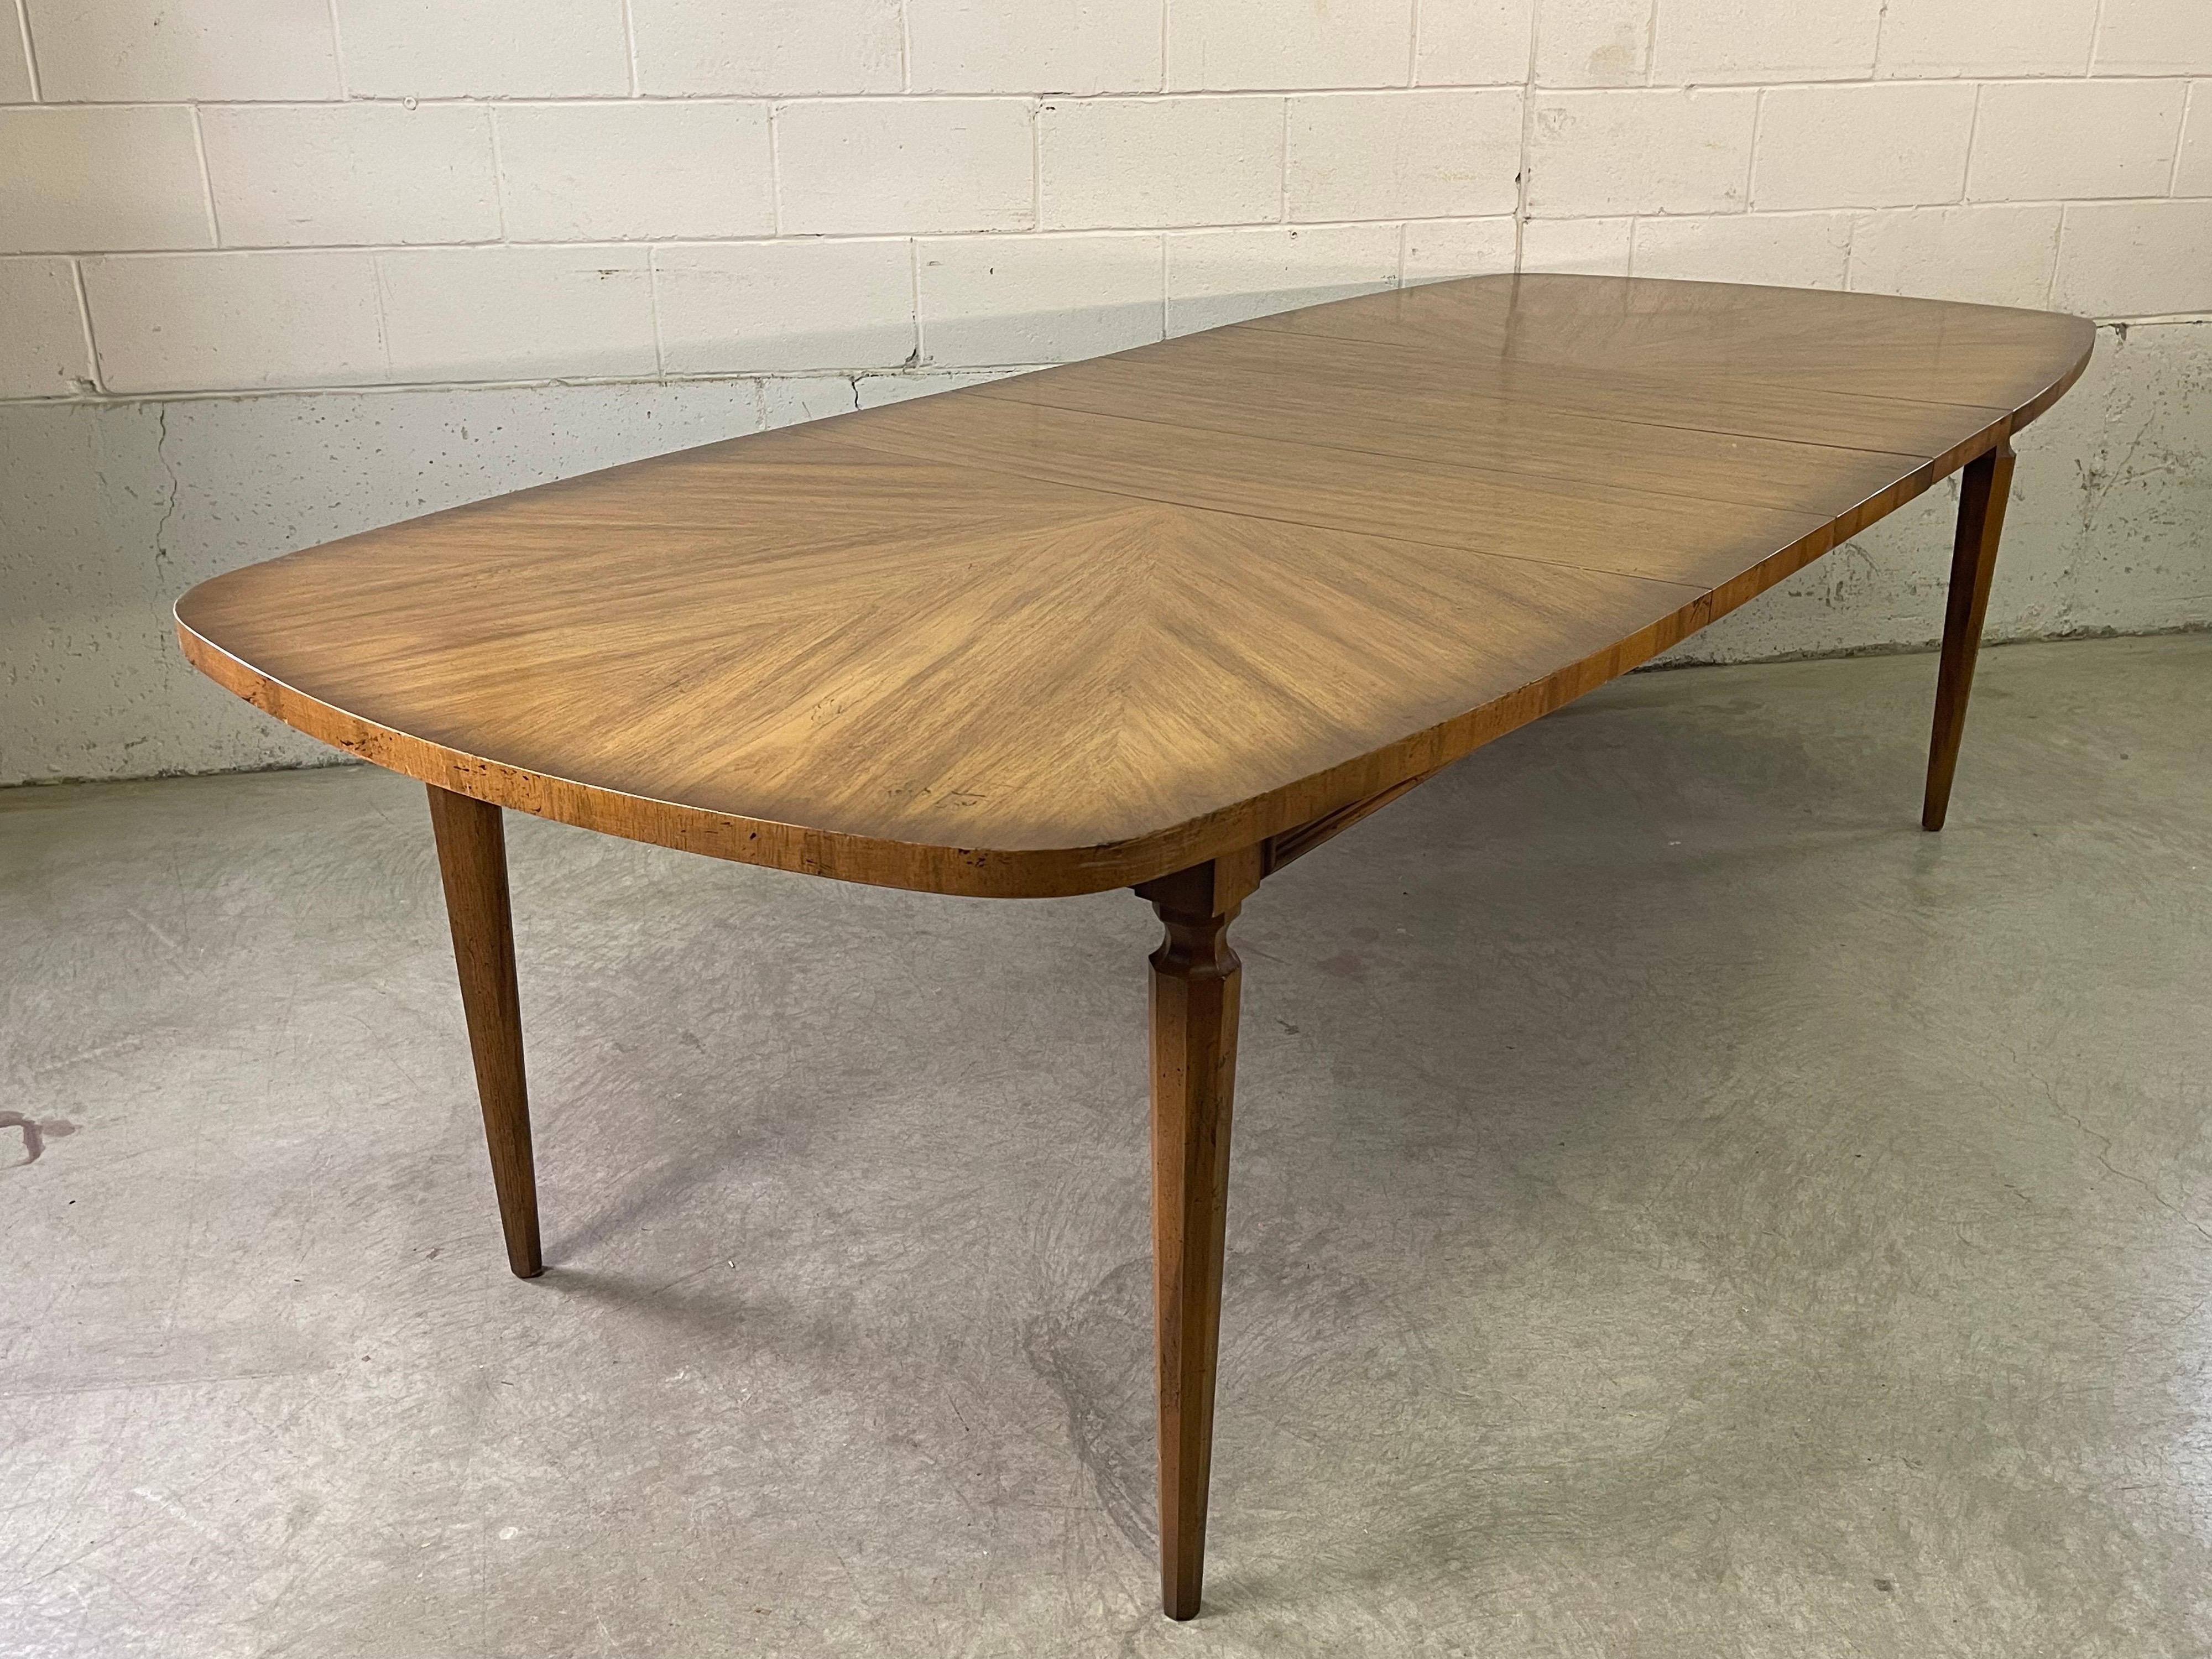 60's dining table